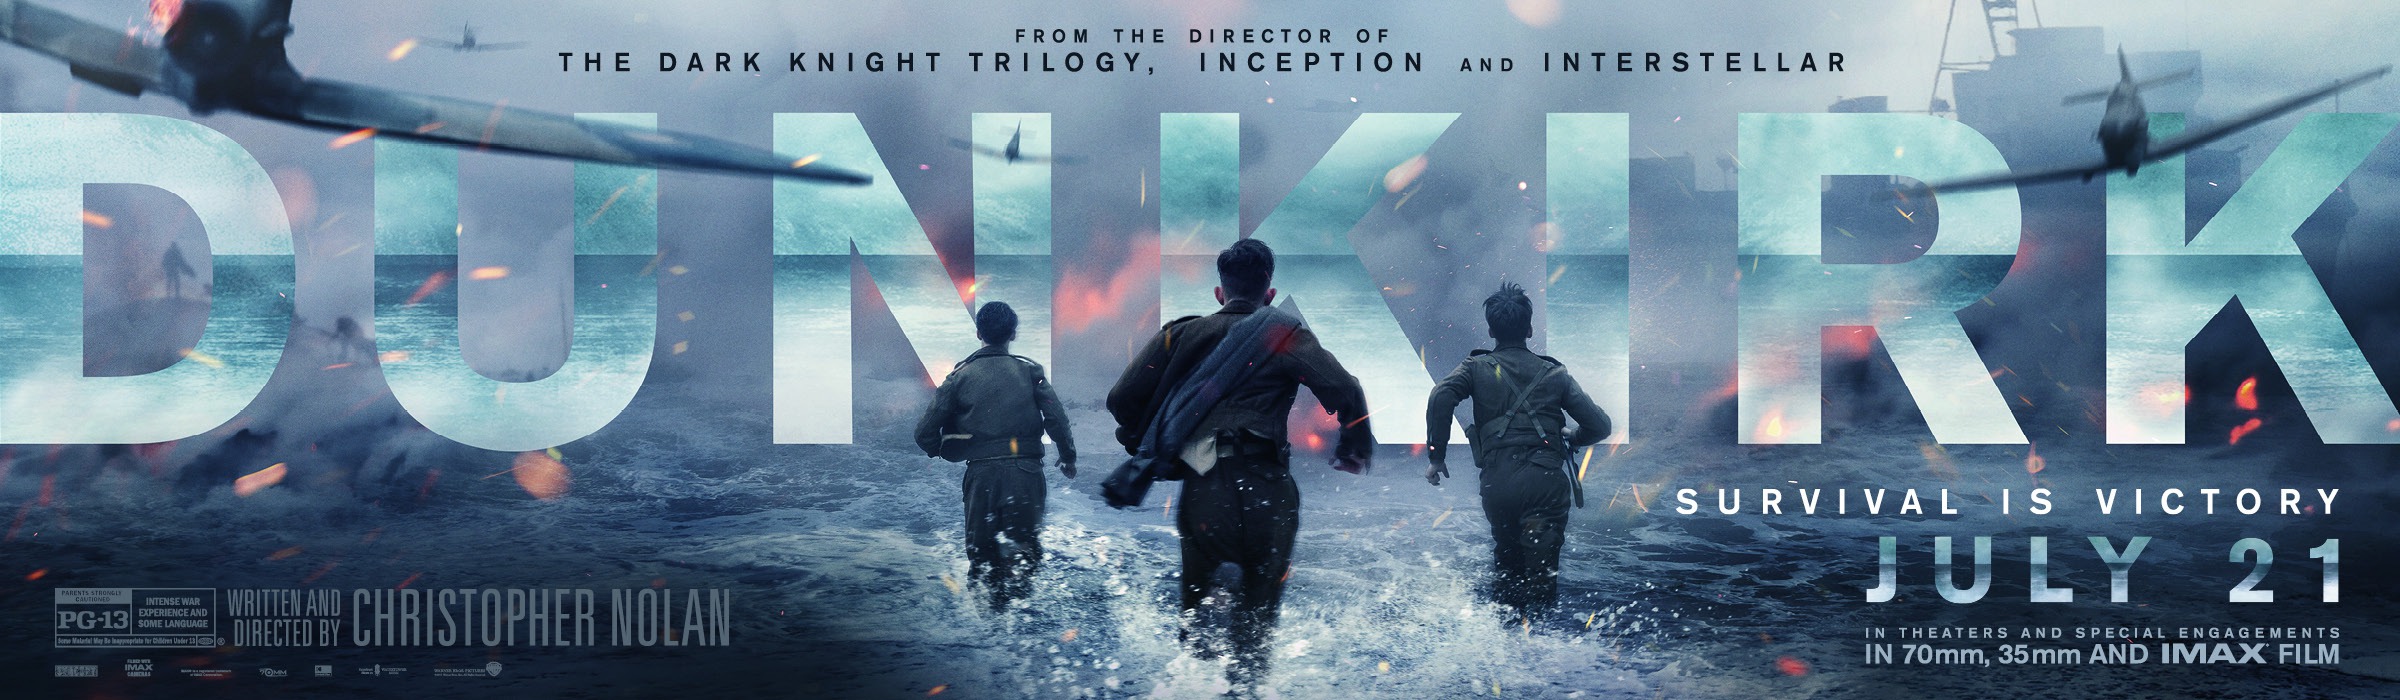 Mega Sized Movie Poster Image for Dunkirk (#11 of 12)